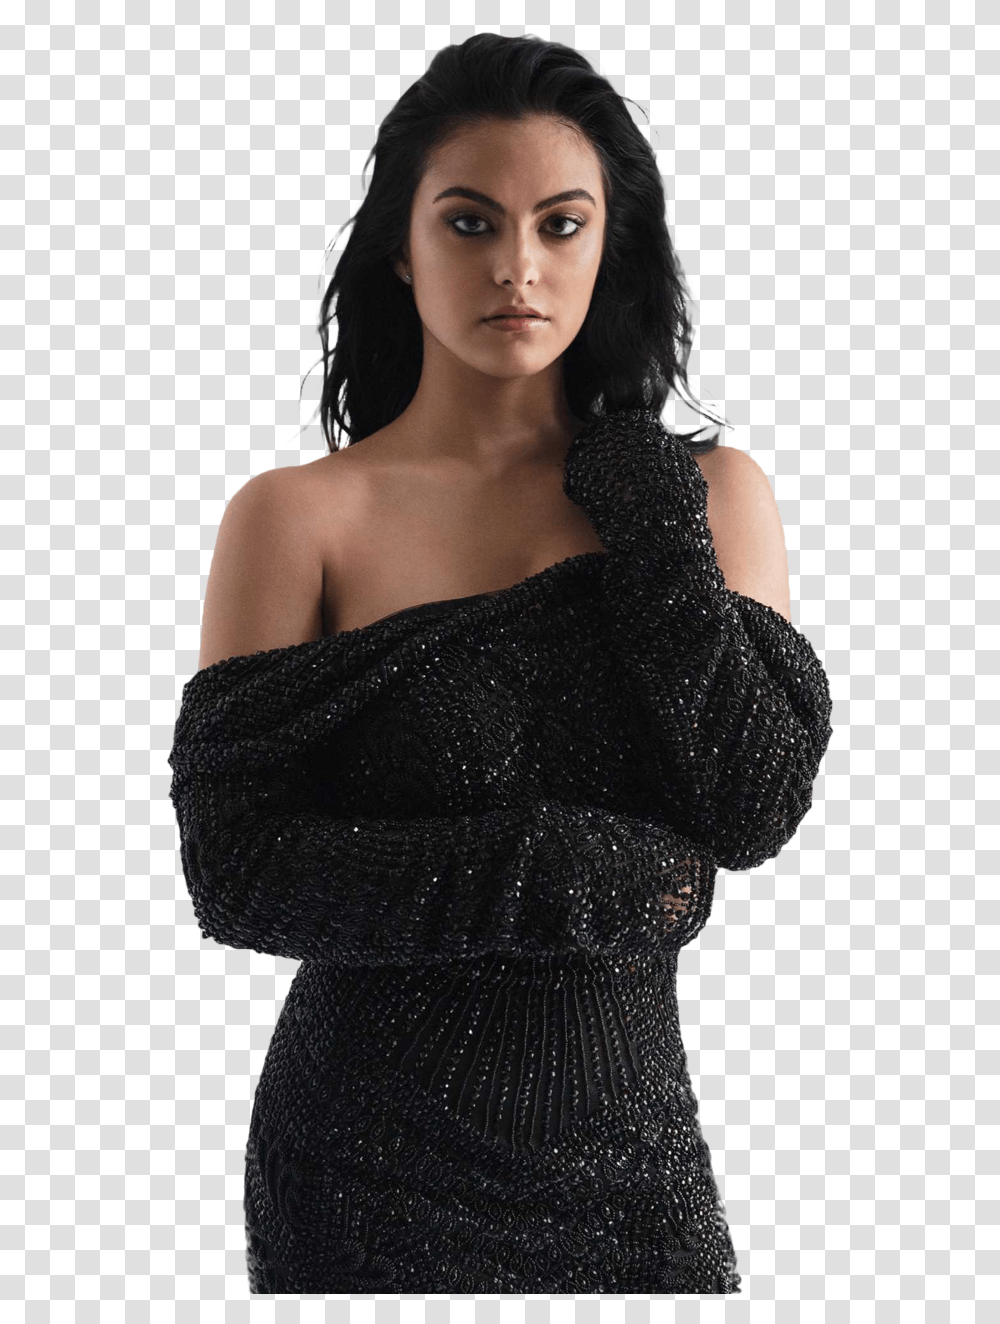 Image About Riverdale In Pngs By Bejanfabiana Camila Mendes, Clothing, Evening Dress, Robe, Gown Transparent Png